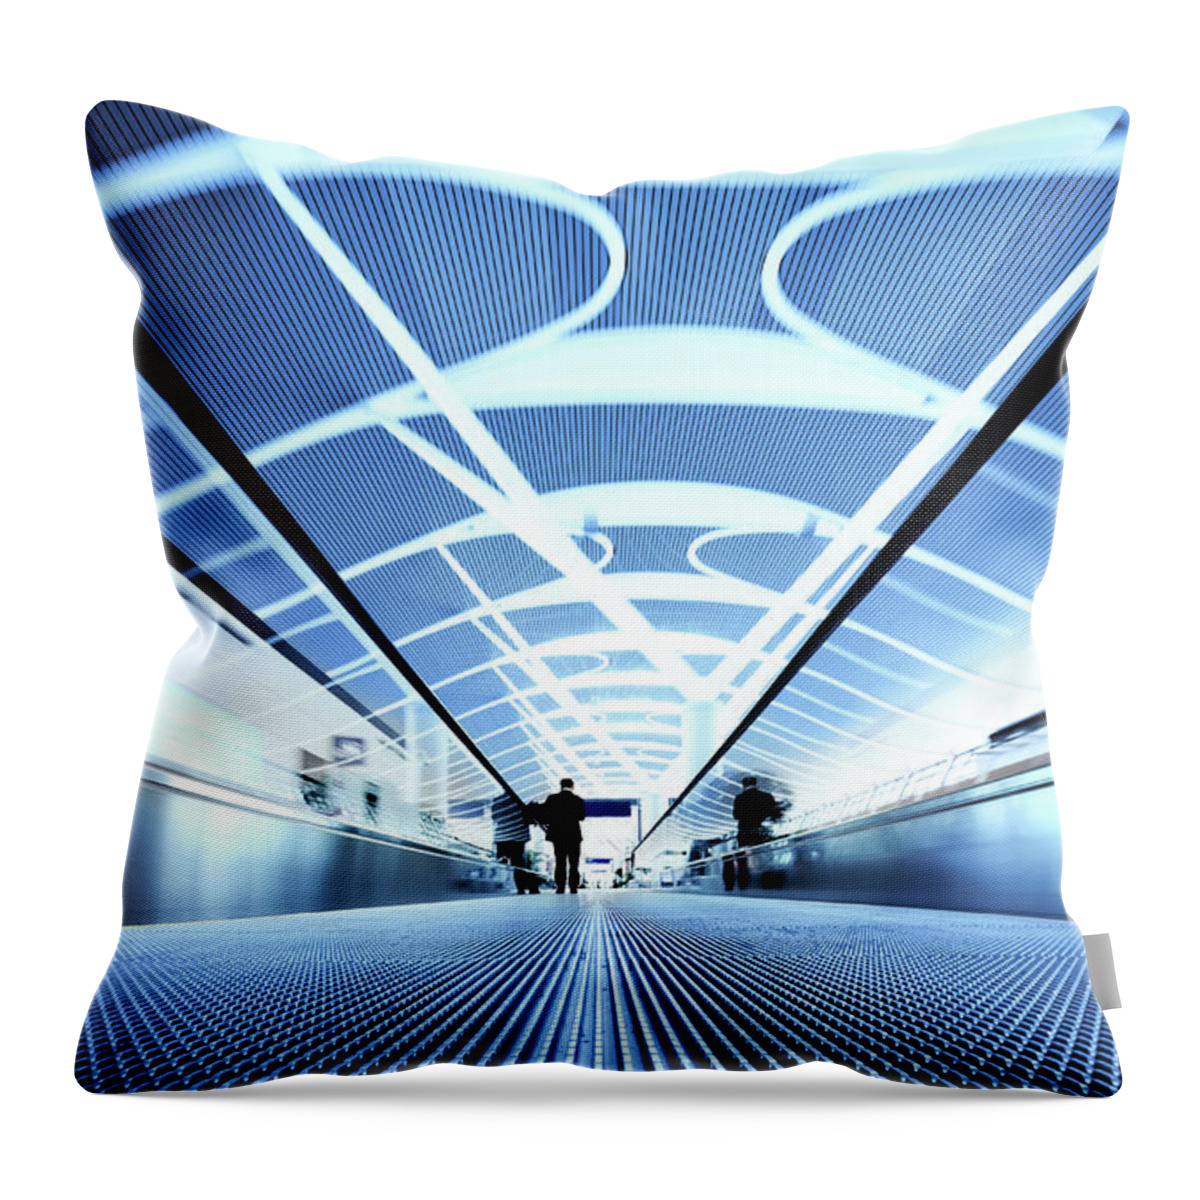 Pedestrian Throw Pillow featuring the photograph Airport Walkway by Nikada